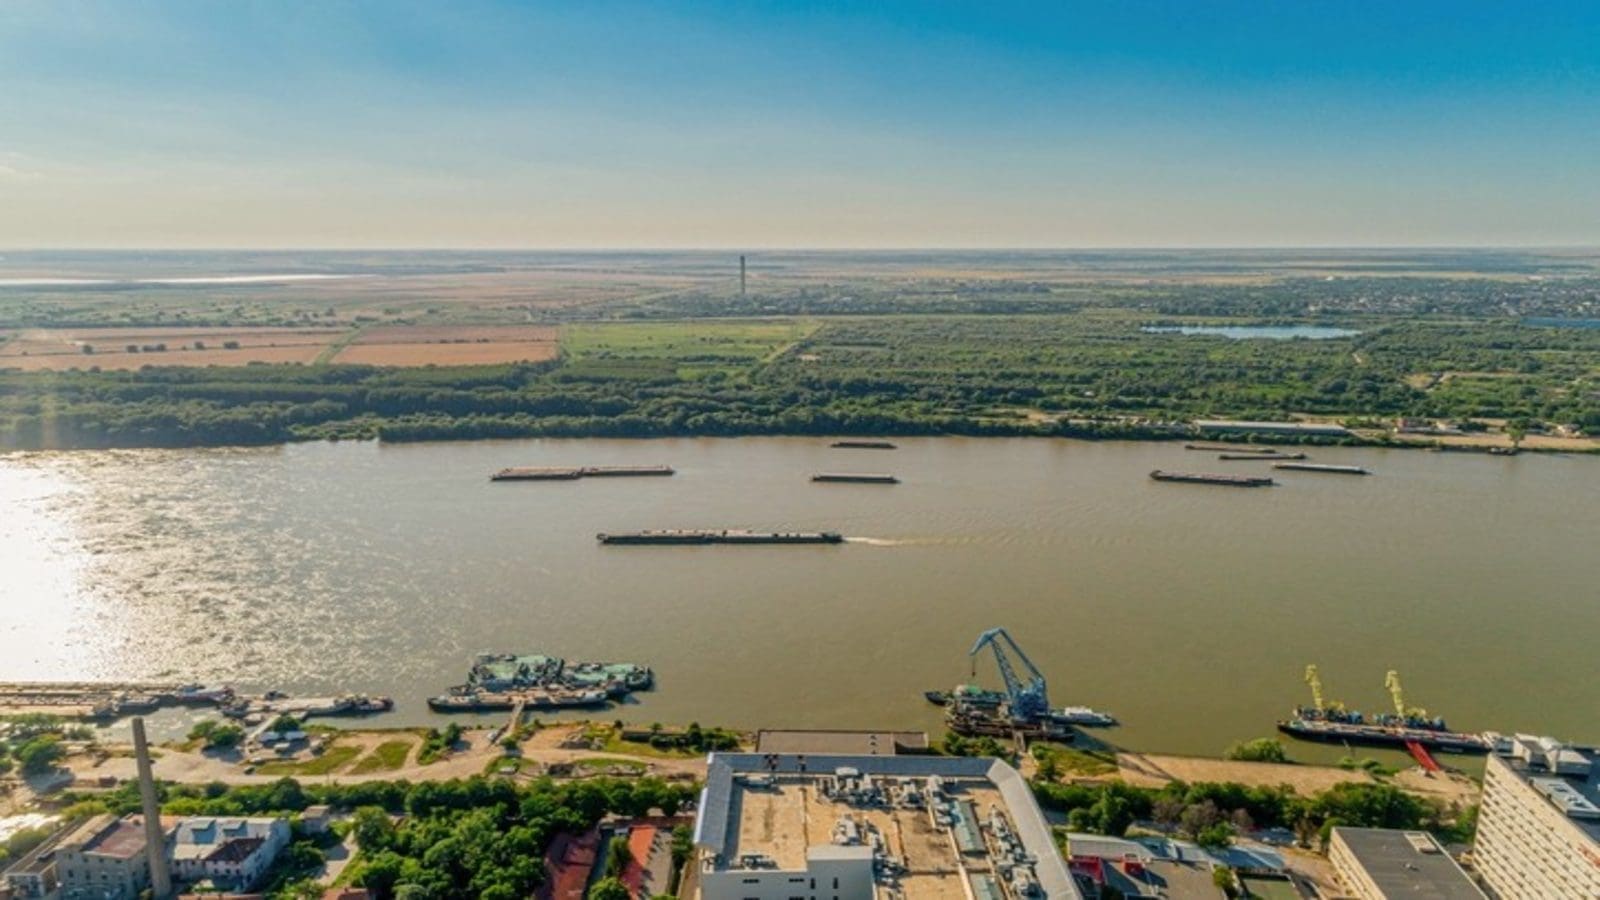 Moldova Danube port offers alternative export route for Ukraine agricultural exports